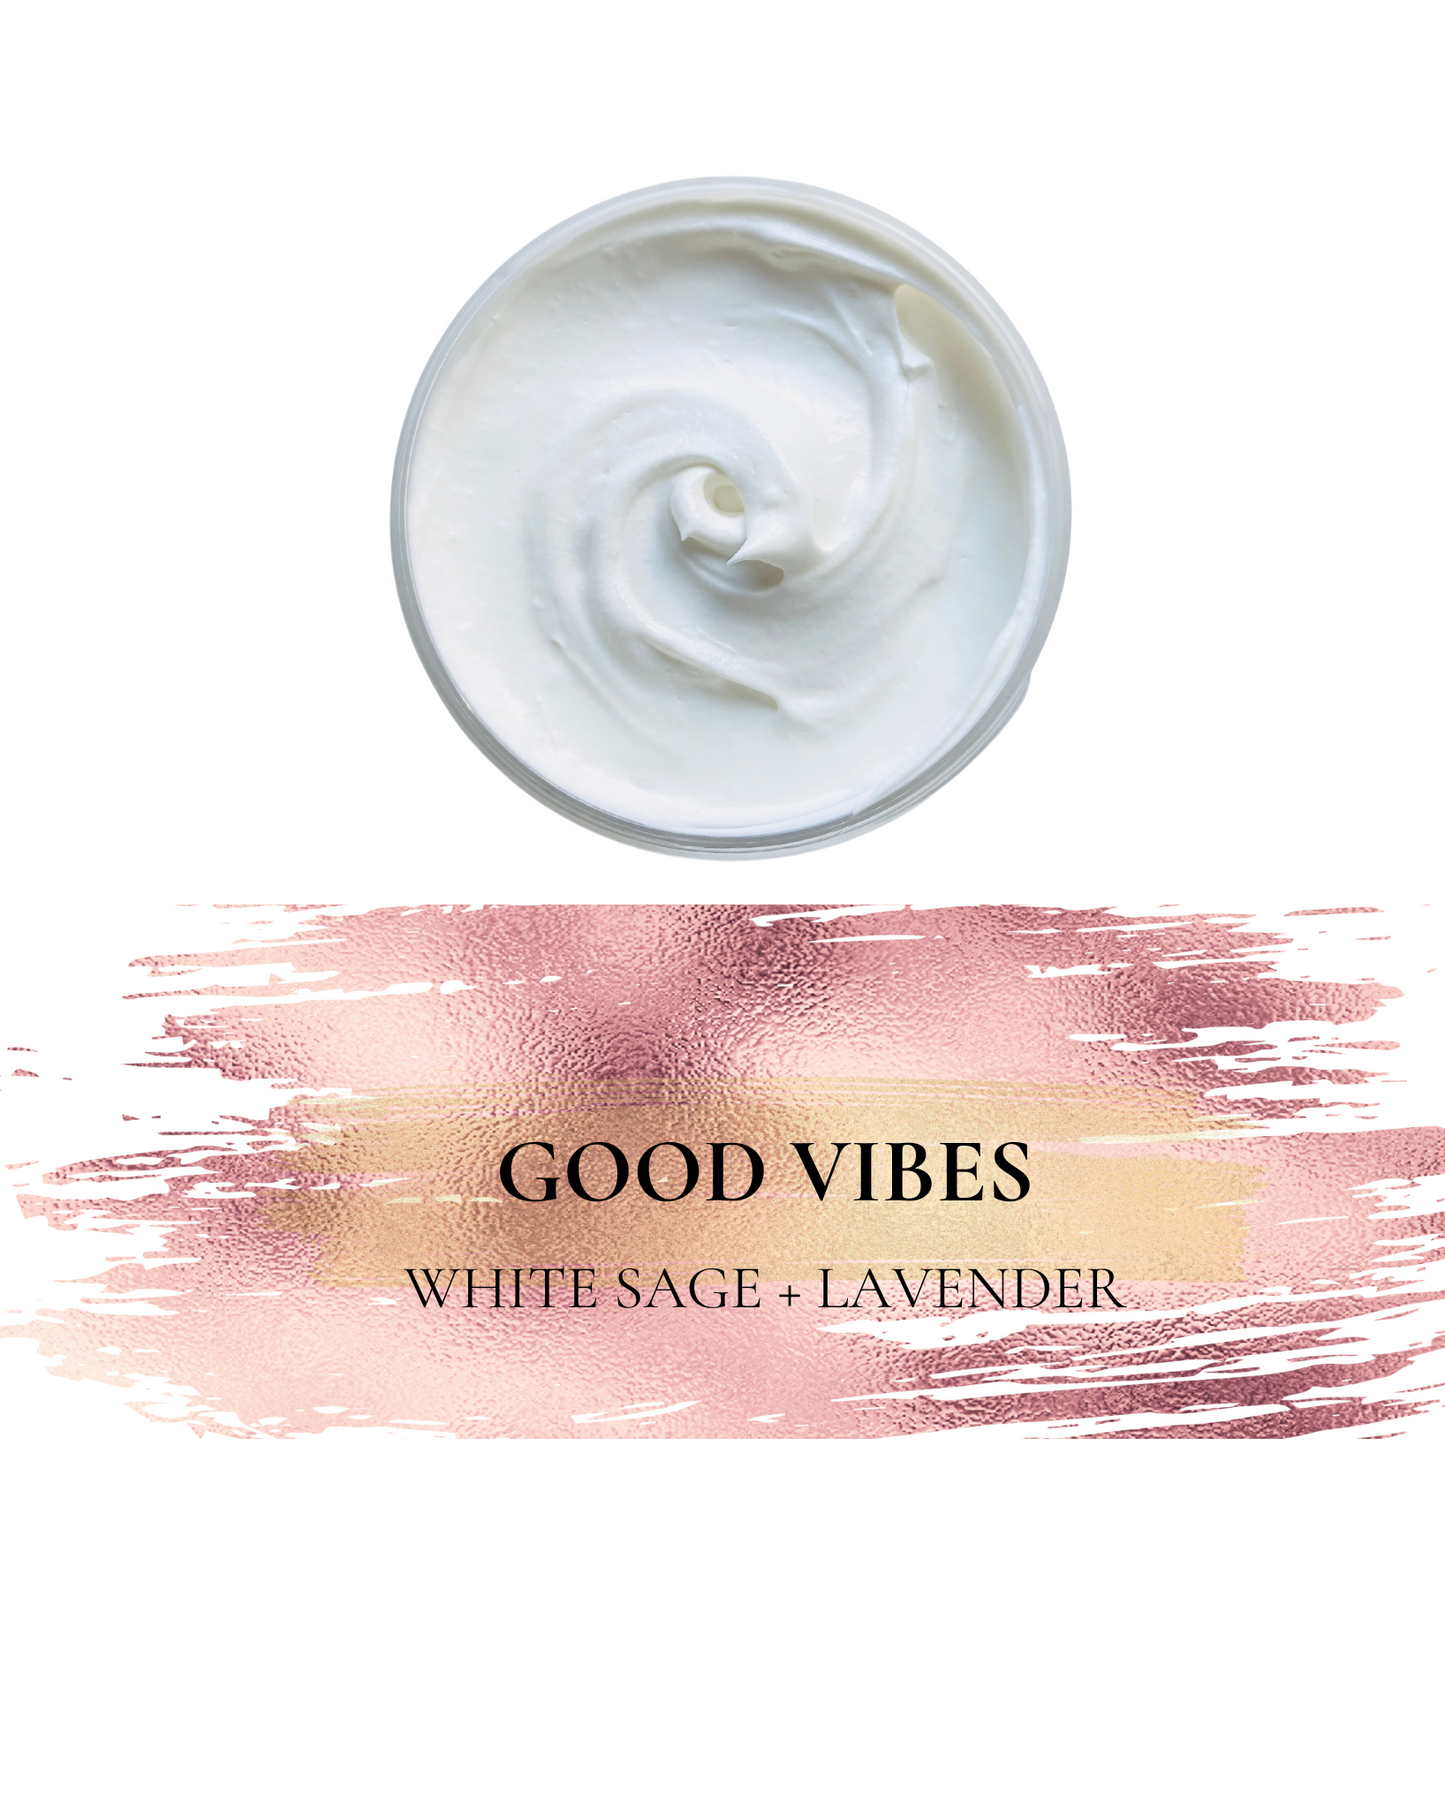 GOOD VIBES WHIPPED BODY BUTTER